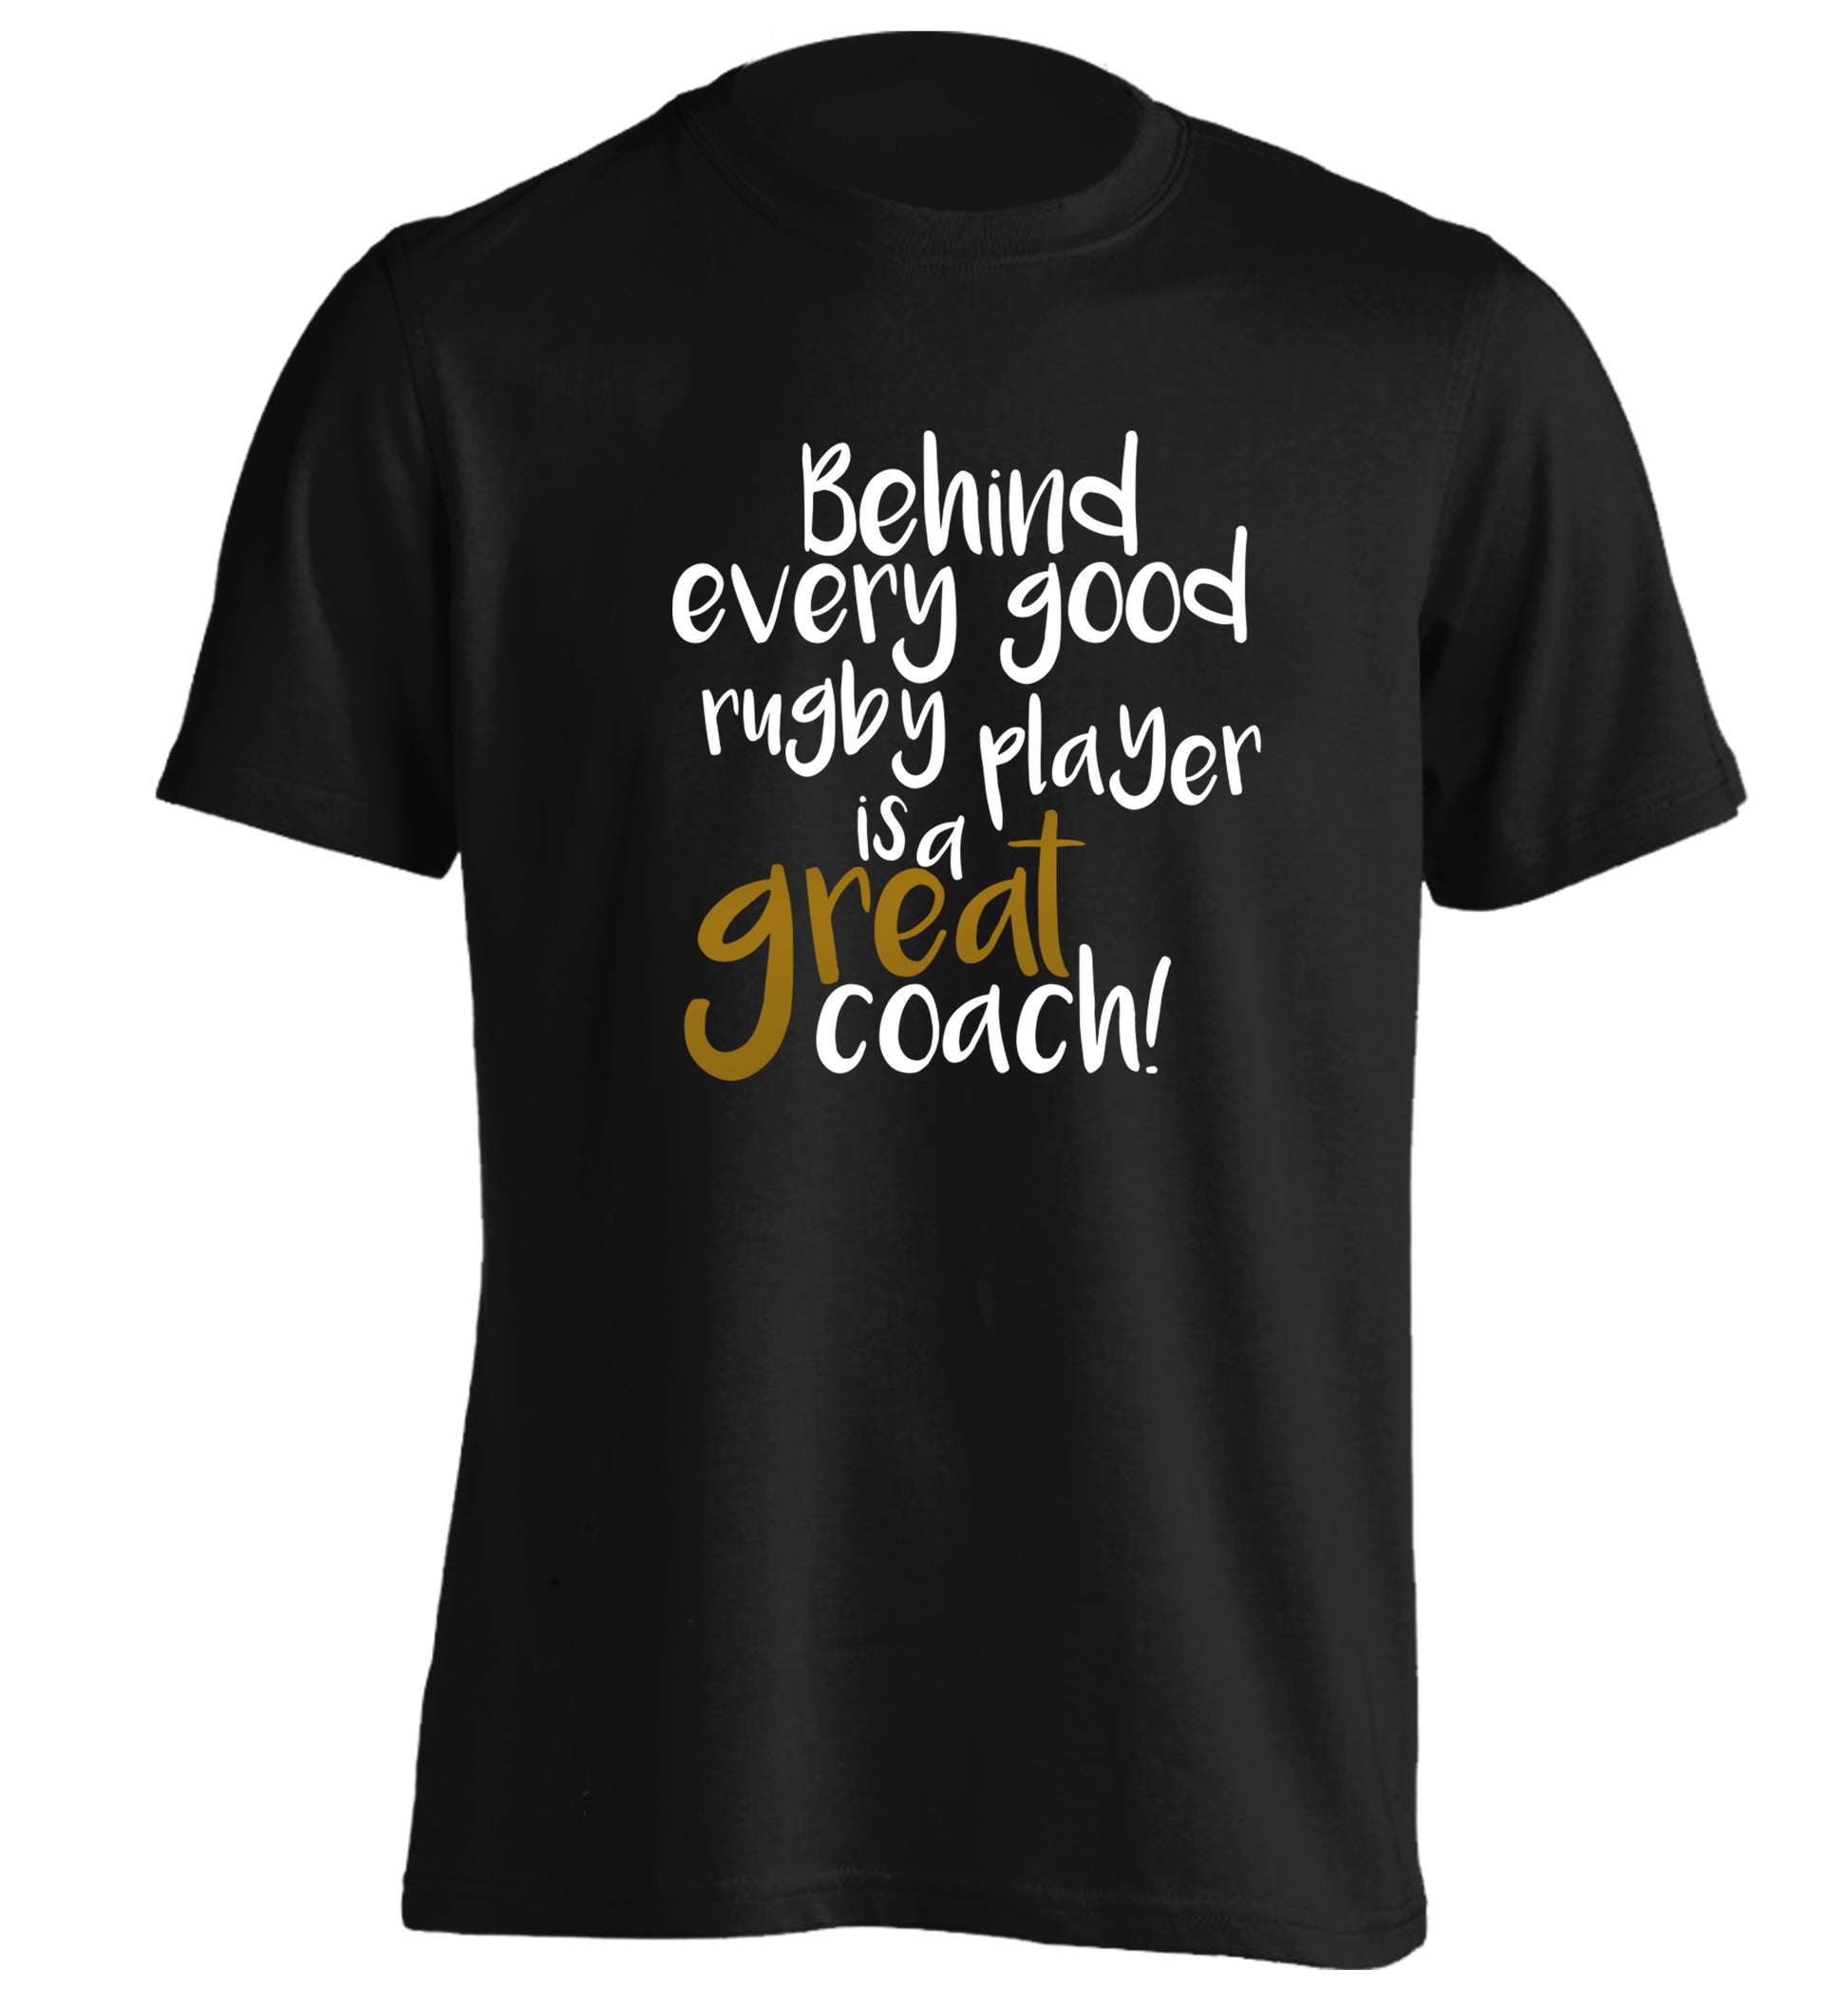 Behind every goor rugby player is a great coach adults unisex black Tshirt 2XL